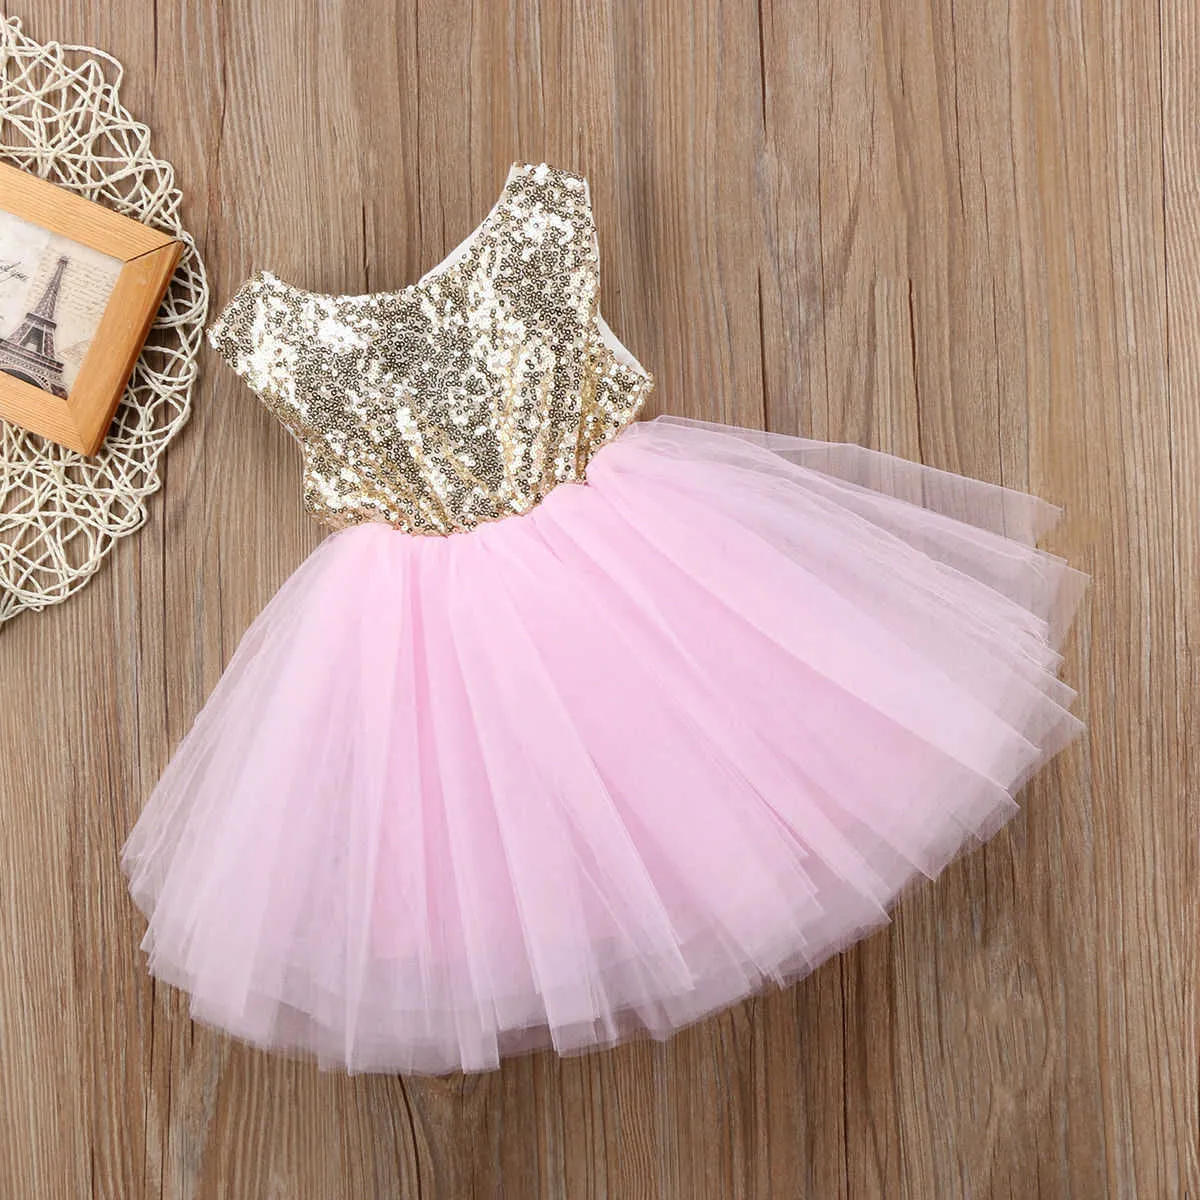 Emmababy Toddler Baby Girl Clothes Fancy Wedding Dress Sleeveless Sequins Party Birthday Baptism Dress For Girl Summer Dresses Q0716